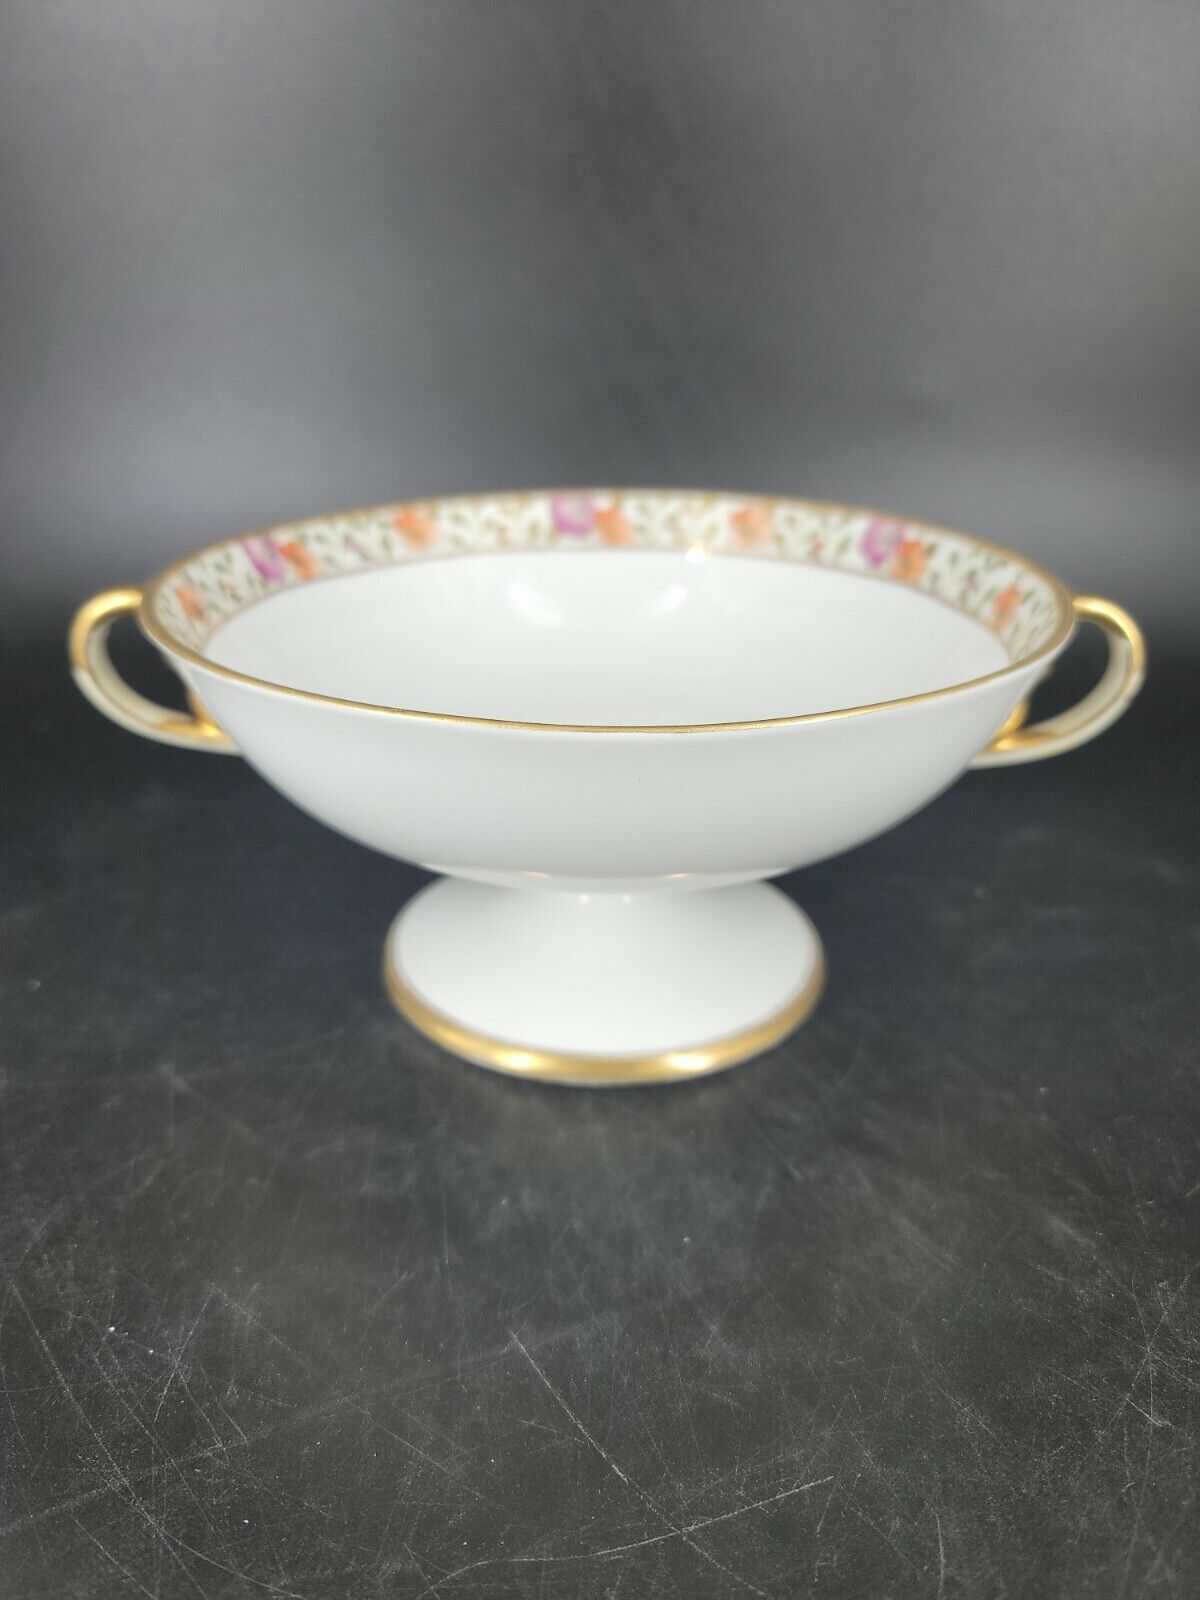 RC NIPPON Hand Painted Double Handle Footed Compote Candy Dish. Mint condition